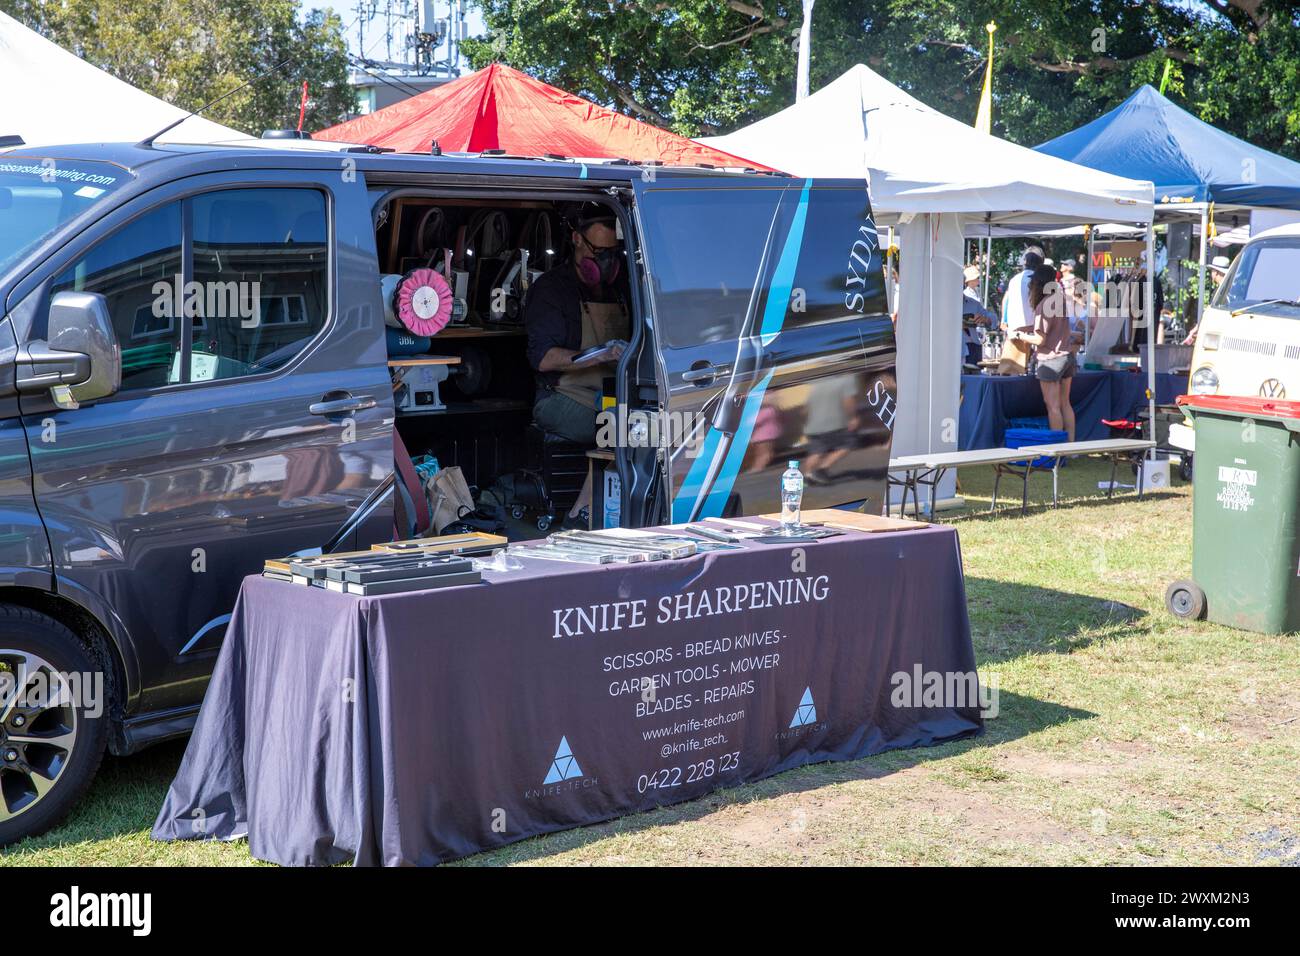 Knife sharpening, man working from his van offers knives sharpening service business at a Sydney Easter markets day, NSW,Australia Stock Photo